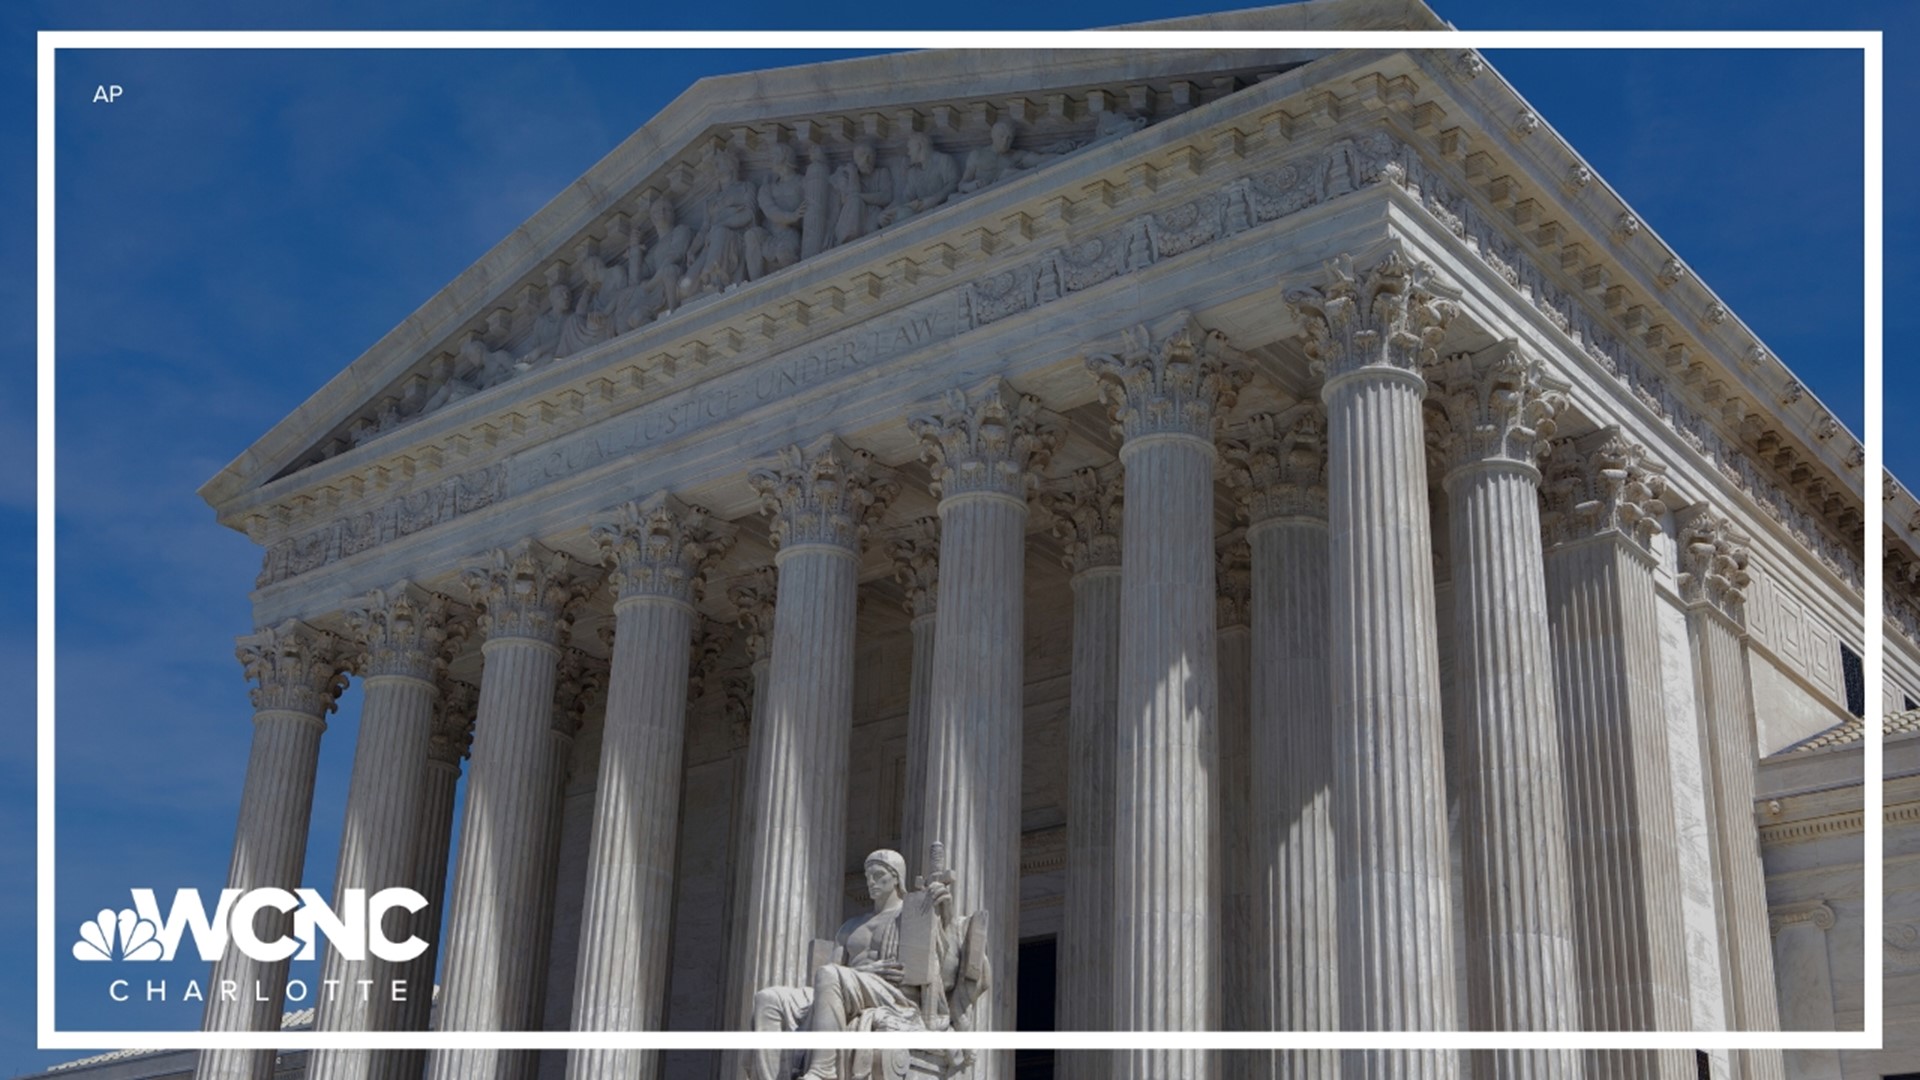 The justices said for the first time that former presidents have absolute immunity from prosecution for their official acts and no immunity for unofficial acts.